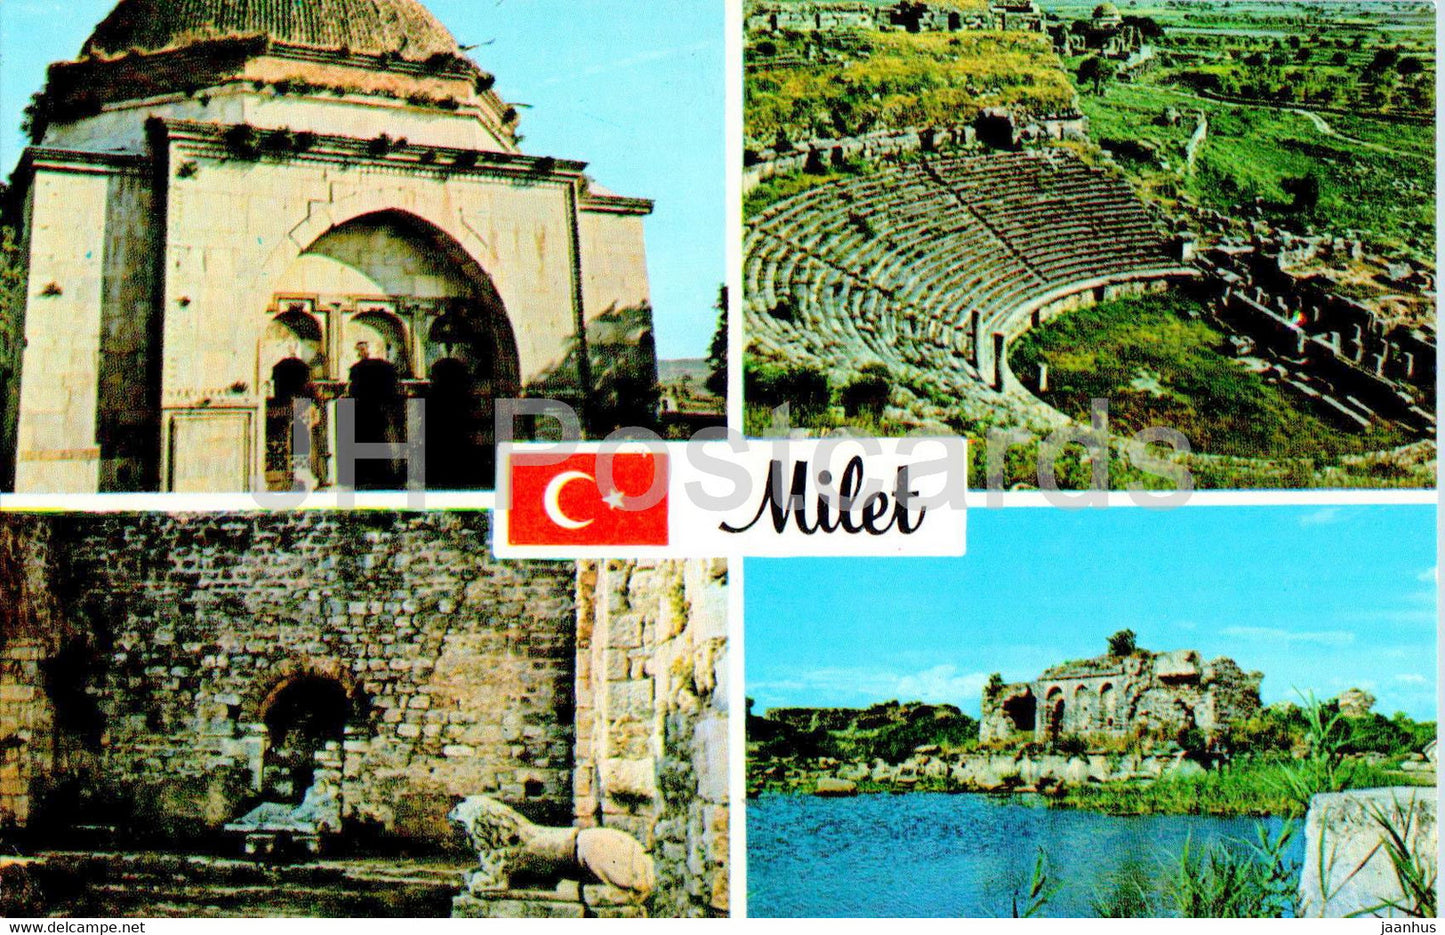 Milet - Ilyasbey Mosque - Theatre - Fountain of Nymphaeum - multiview - 9-18 - Turkey - unused - JH Postcards